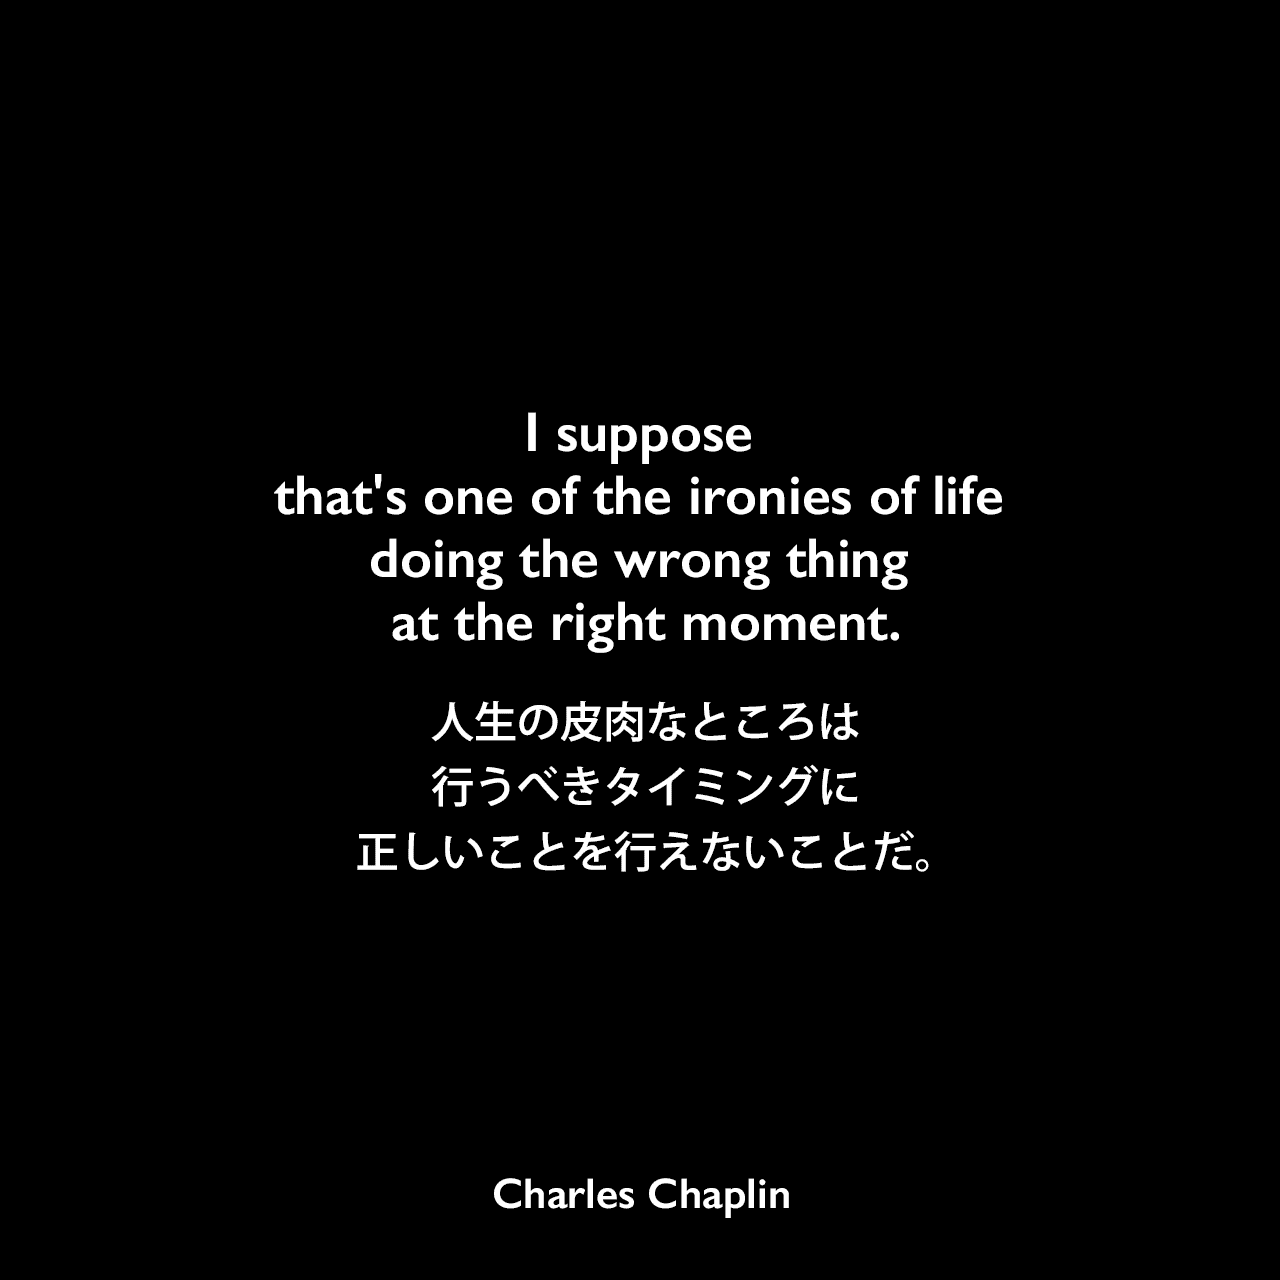 I suppose that's one of the ironies of life doing the wrong thing at the right moment.人生の皮肉なところは、行うべきタイミングに正しいことを行えないことだ。- 映画「殺人狂時代」のセリフよりCharles Chaplin